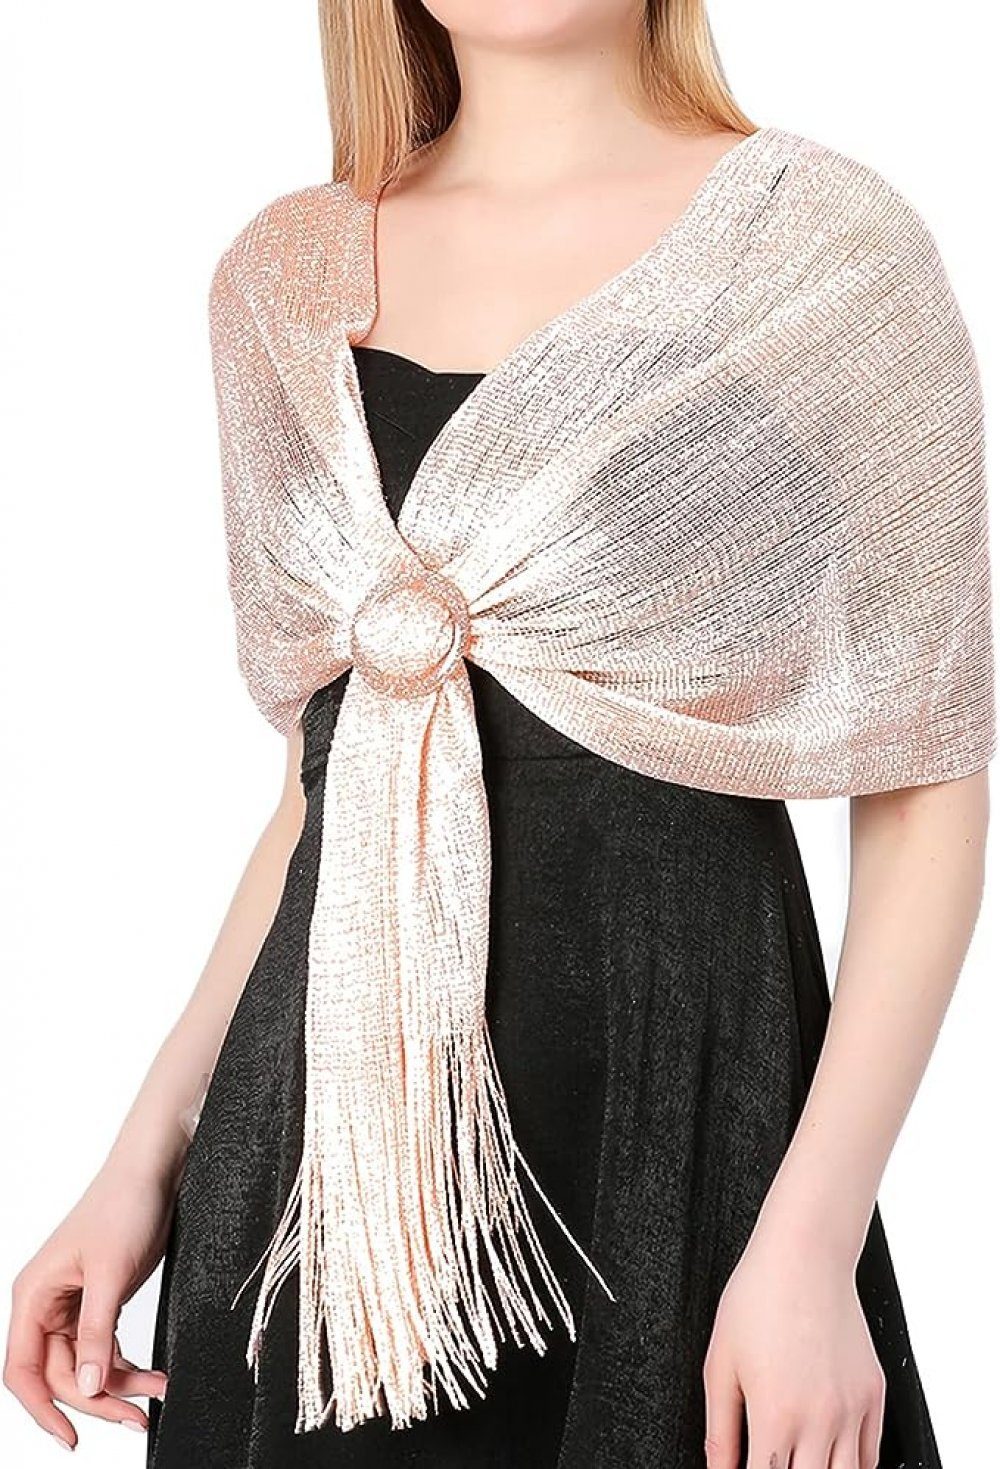 WaKuKa Schal for suitable Holiday evening buckle parties metal sparkling Rosa shawl